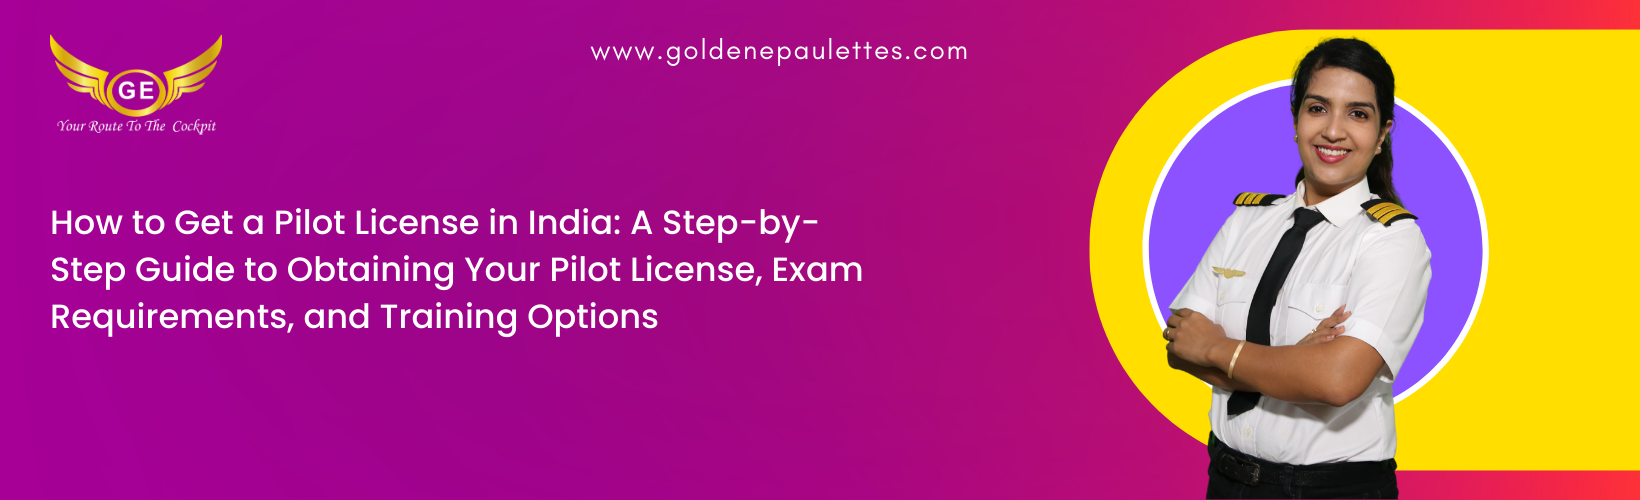 How to Obtain a Pilot License in India